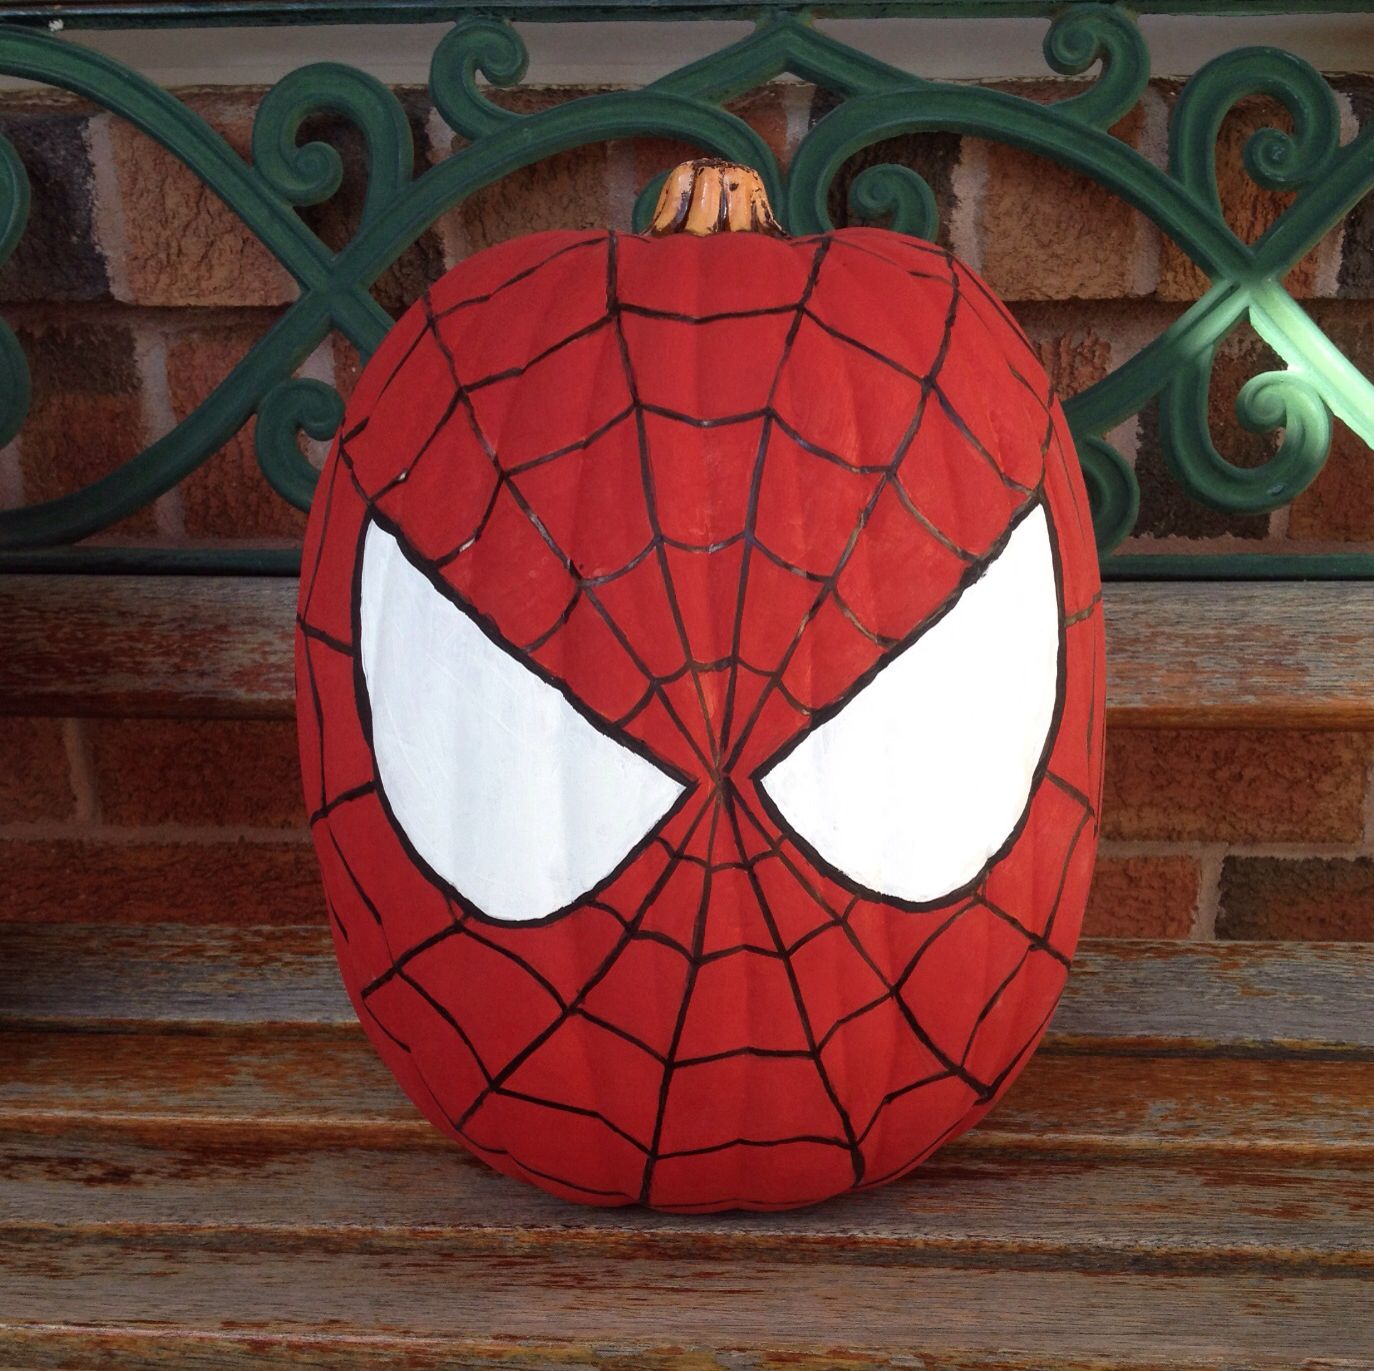 An easy painting project for spiderman's fans